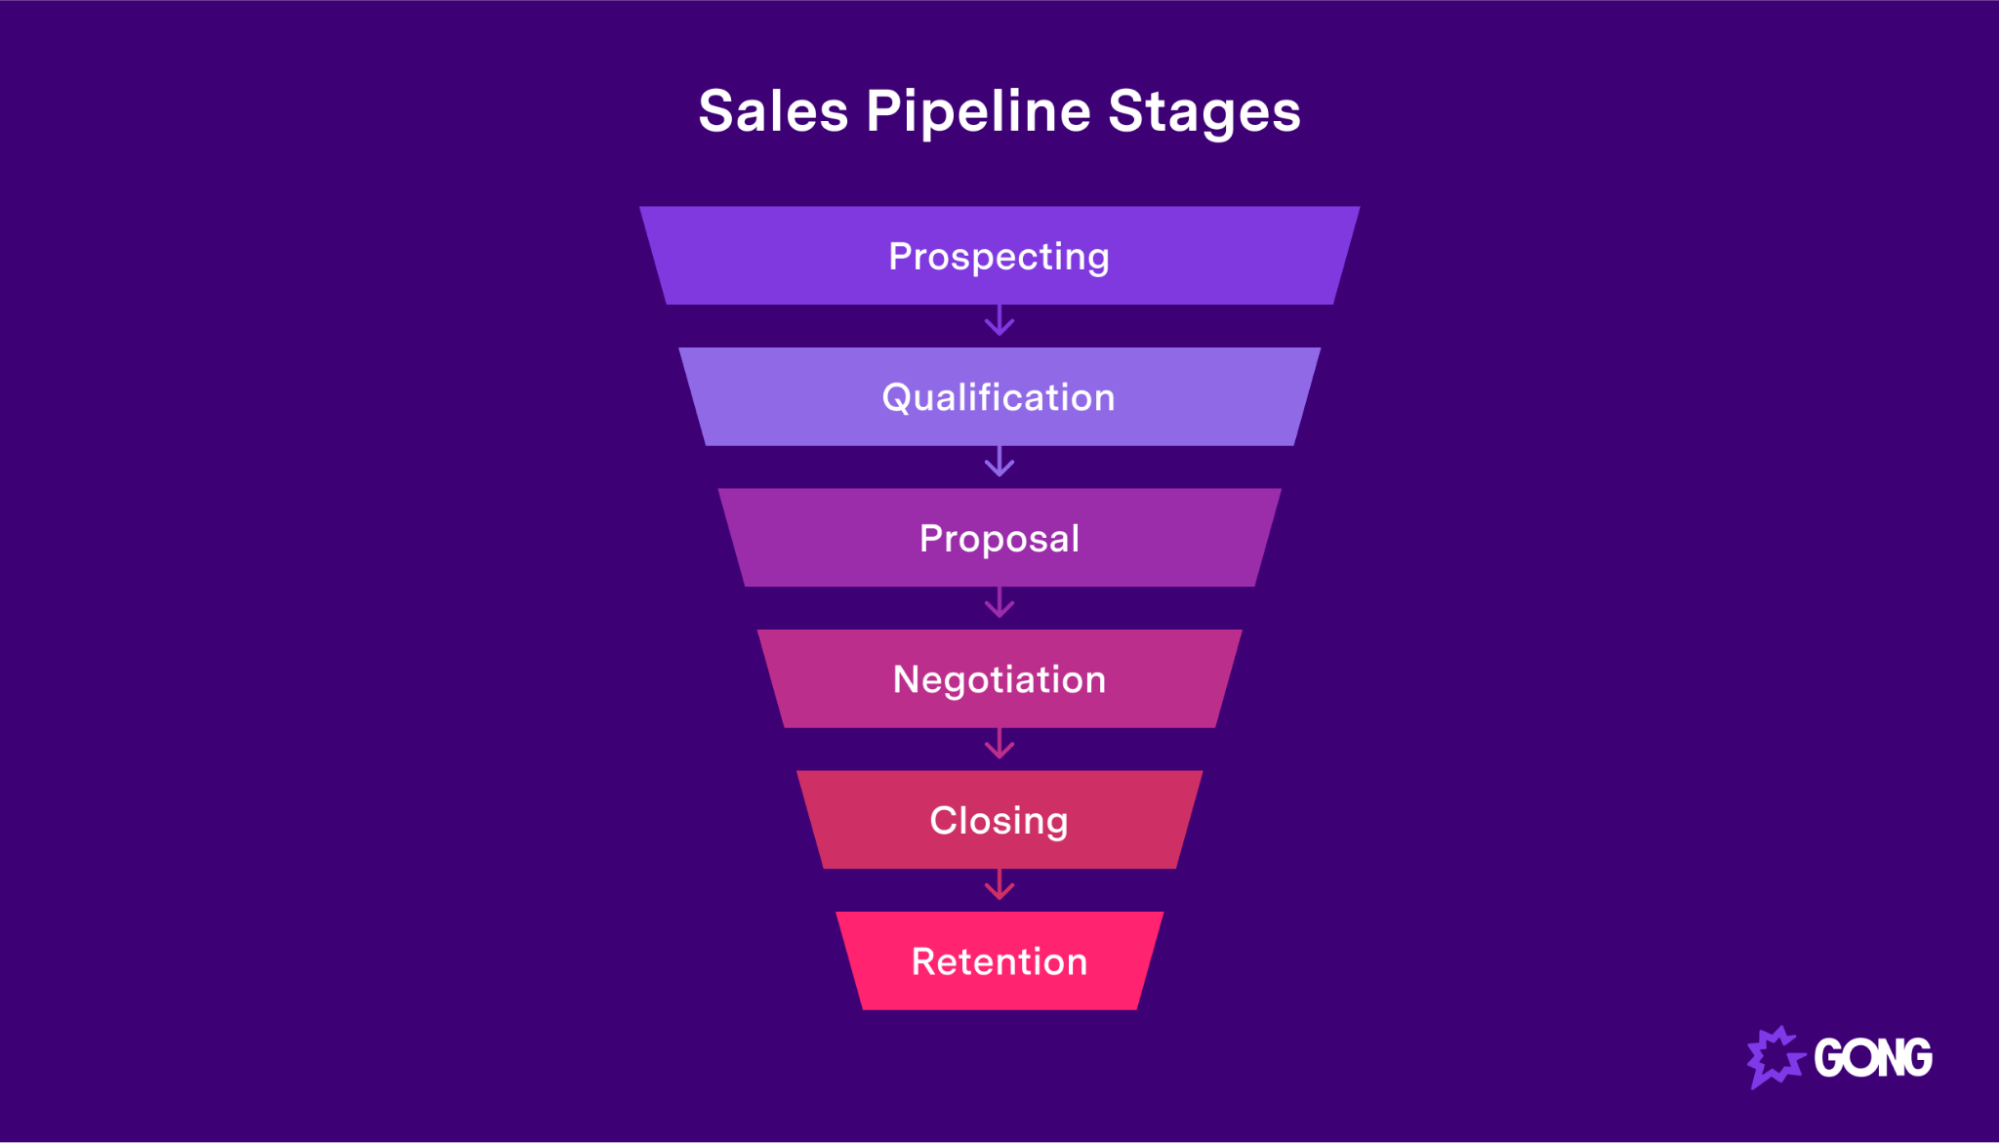  What are the stages of a sales pipeline?